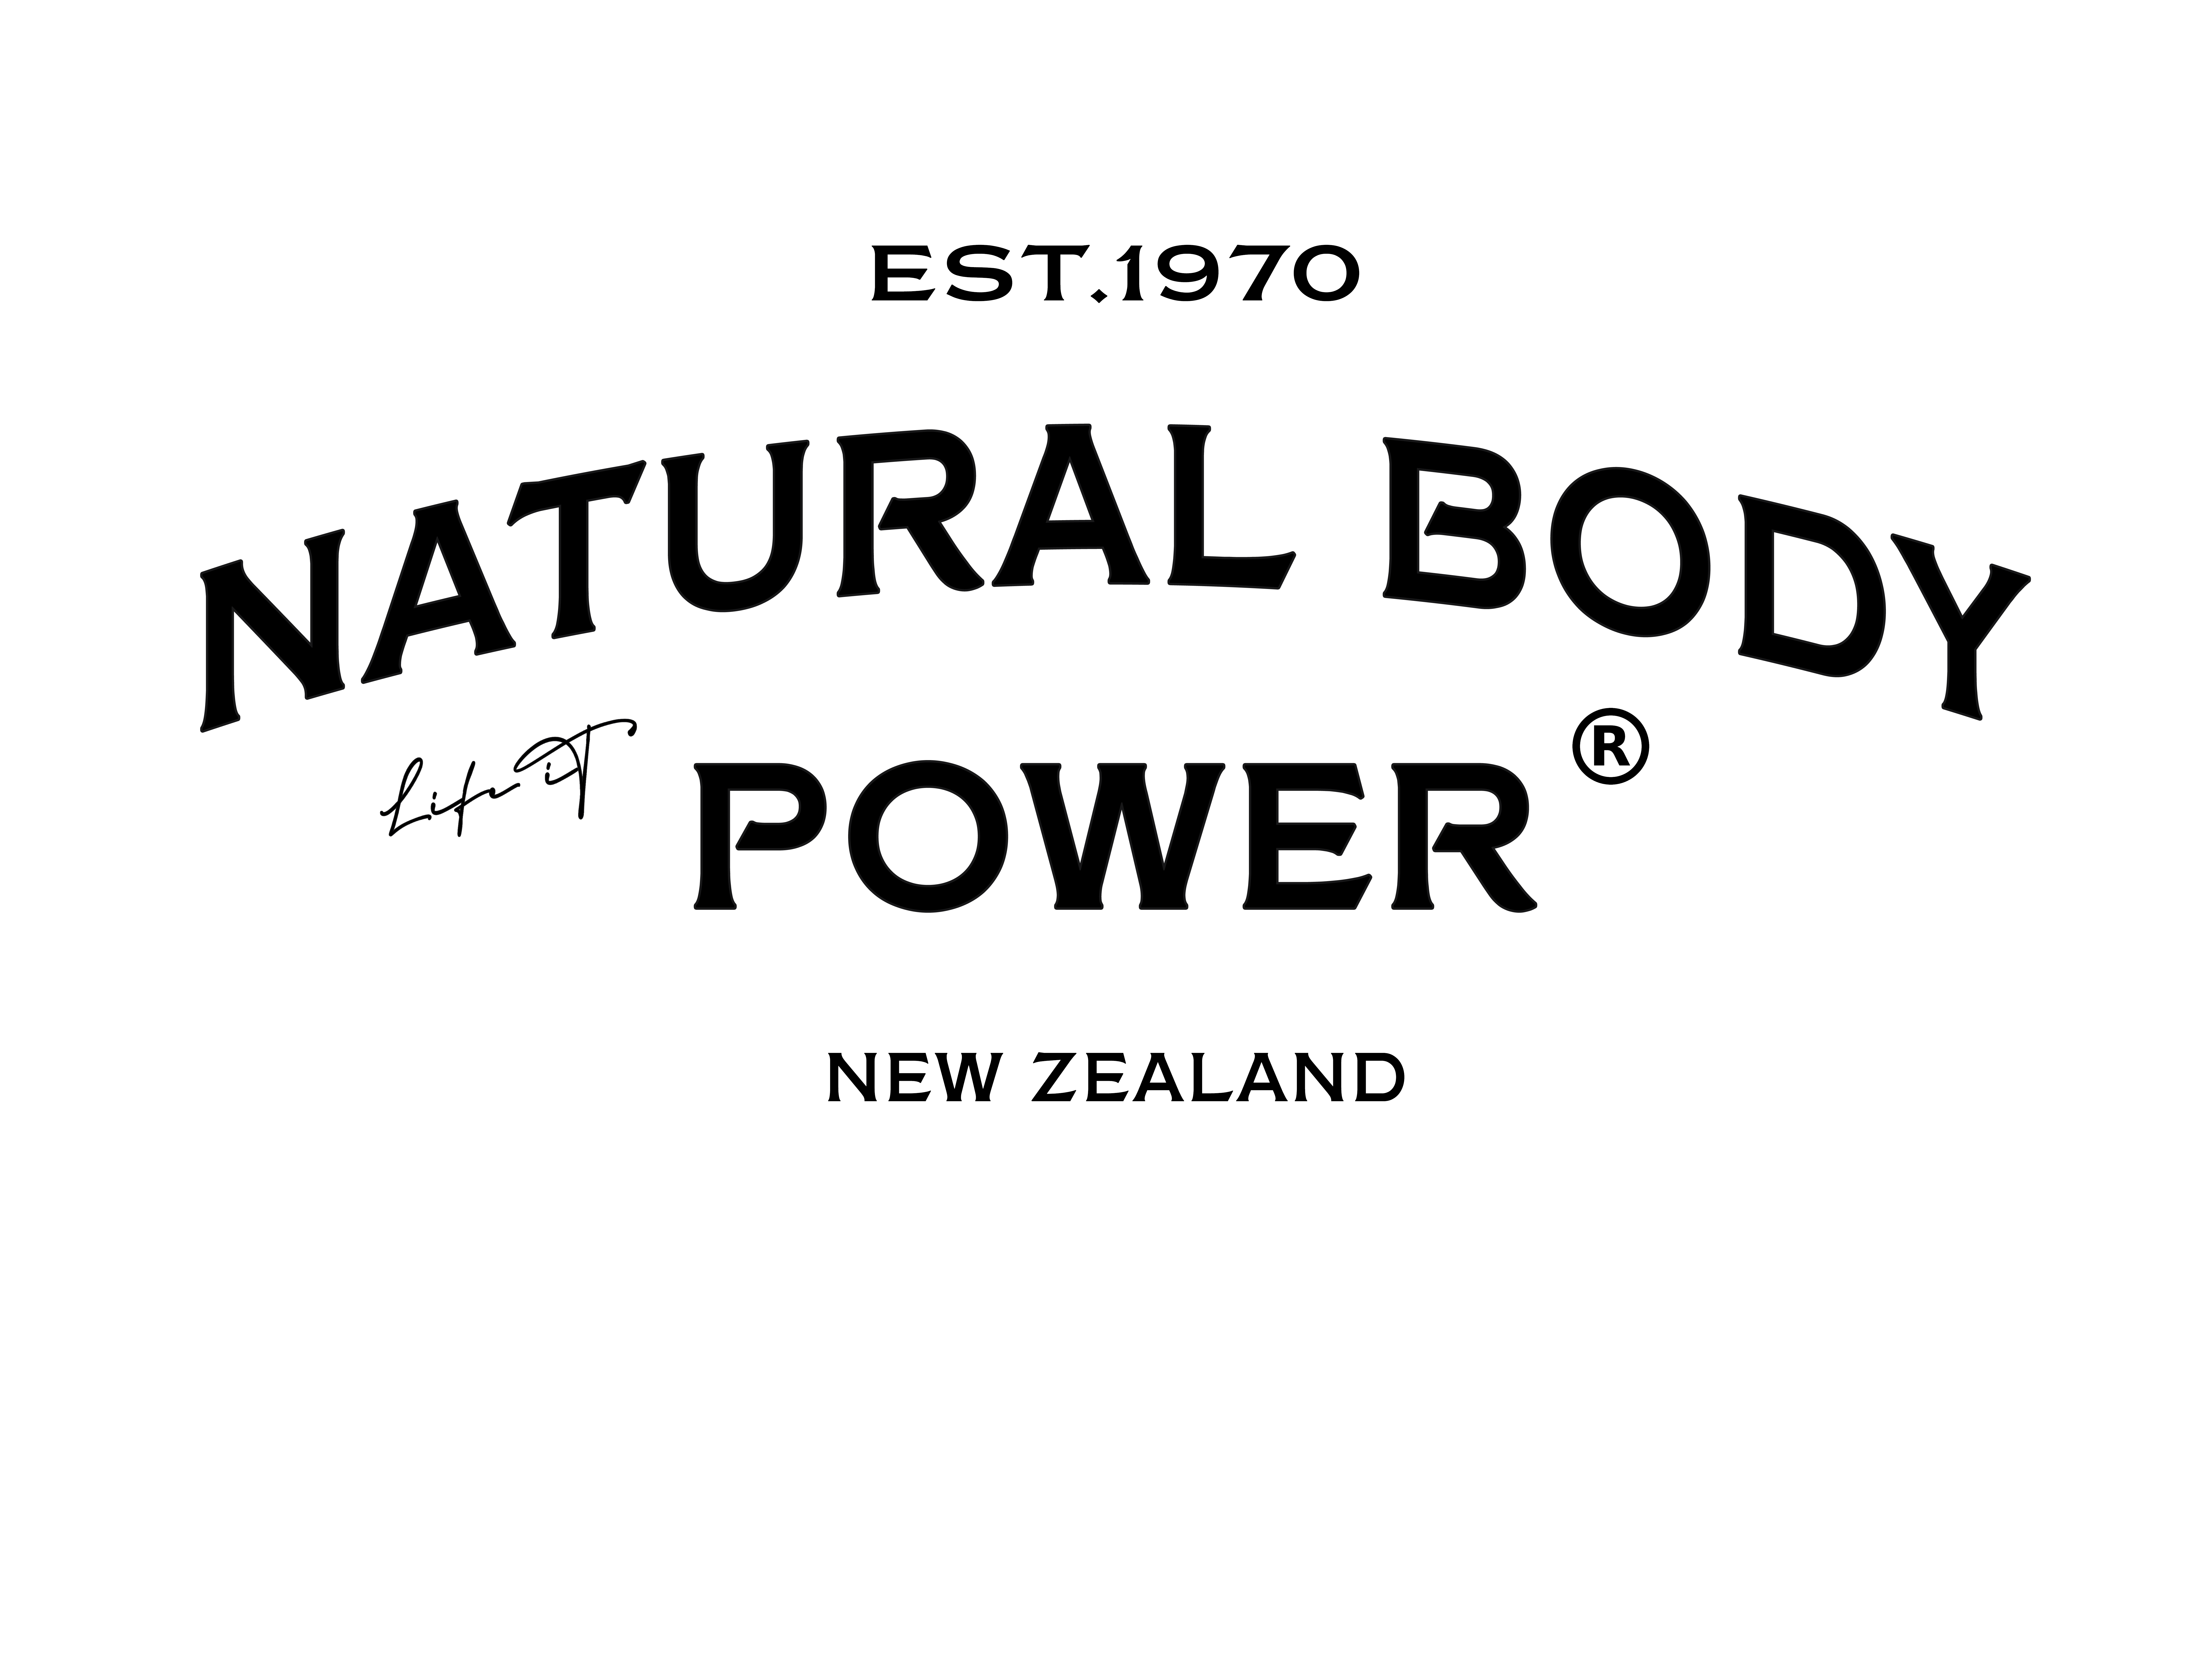 NATURAL BODY POWER